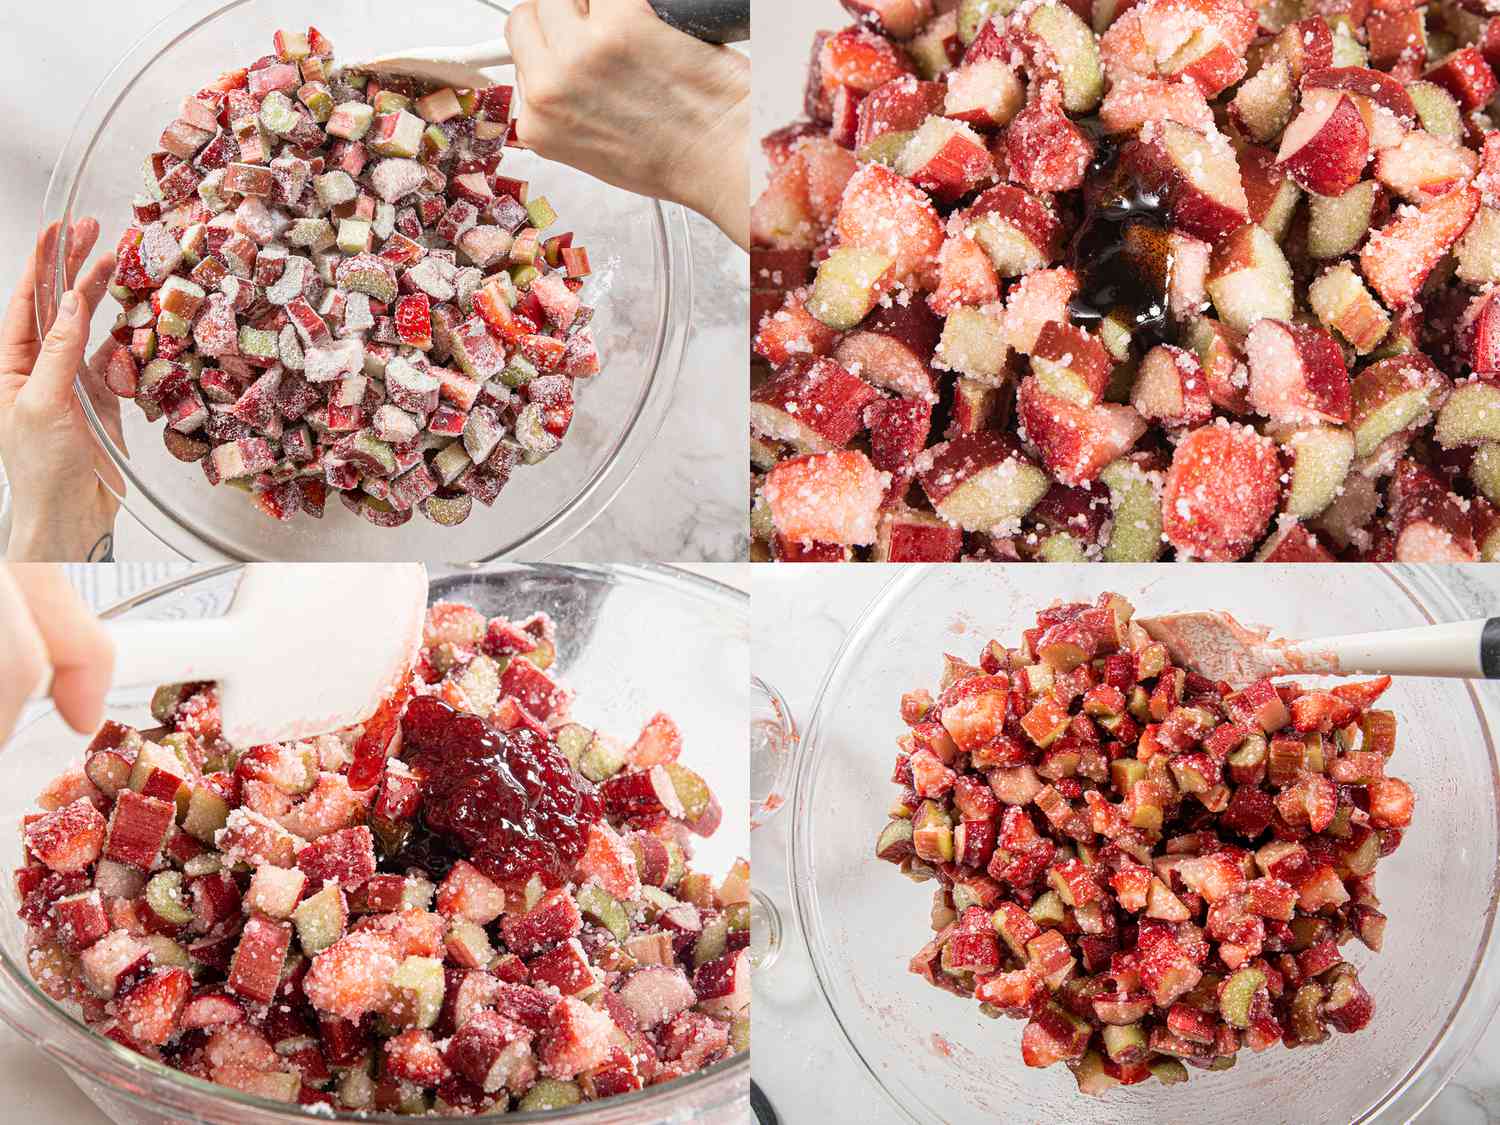 Four image collage of adding sugar, vanilla, and jam to fruit mixture